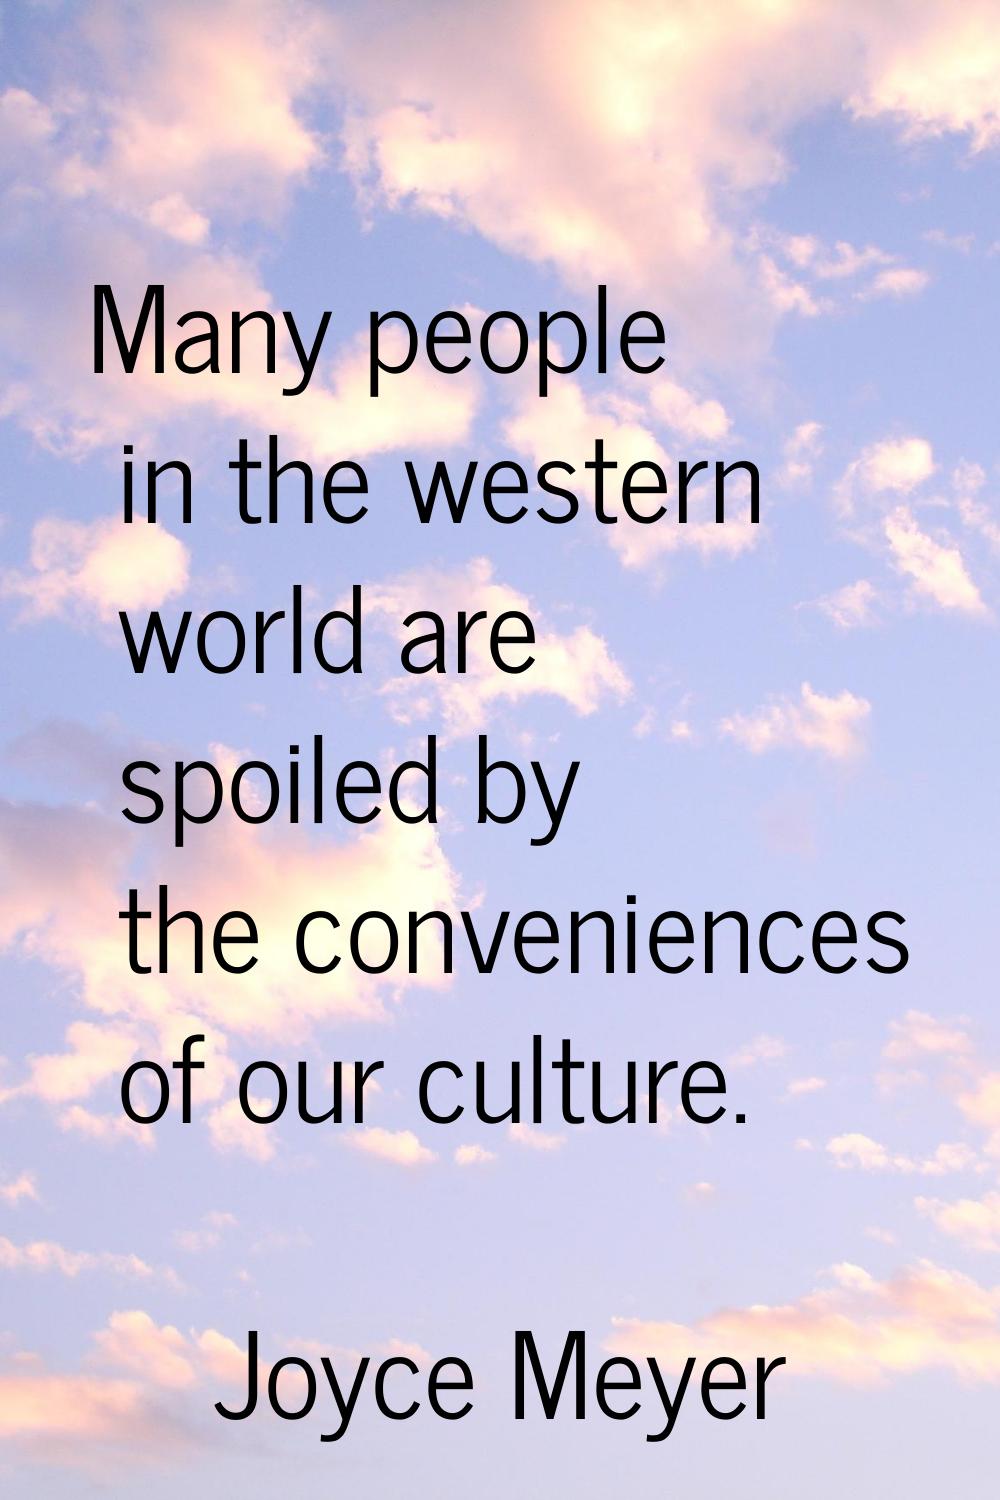 Many people in the western world are spoiled by the conveniences of our culture.